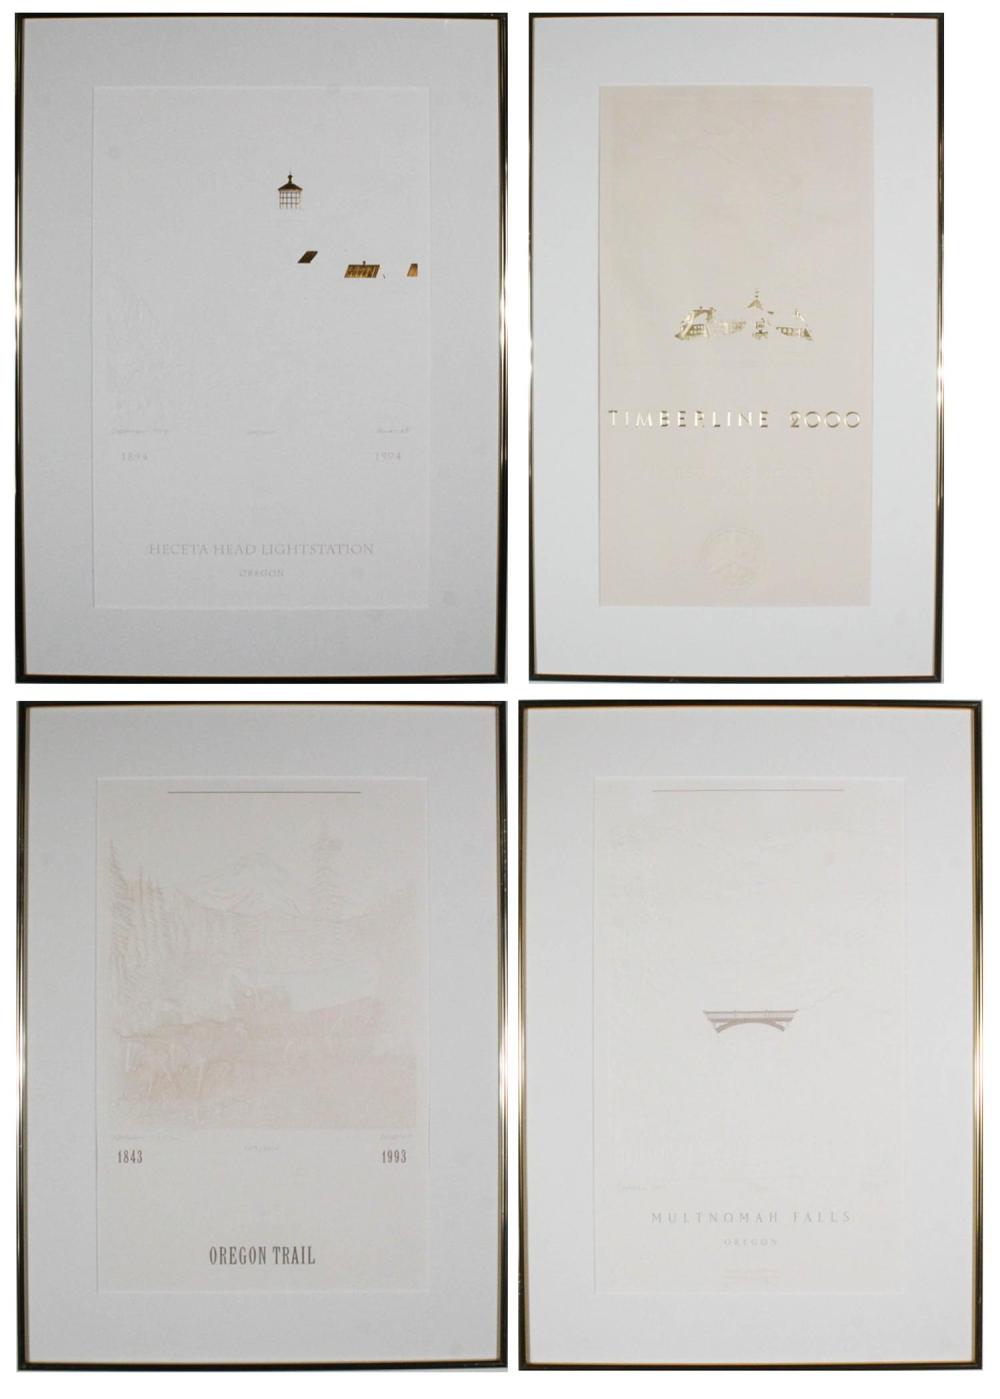 FOUR EMBOSSED COLLECTIBLE PRINTS 2ed768